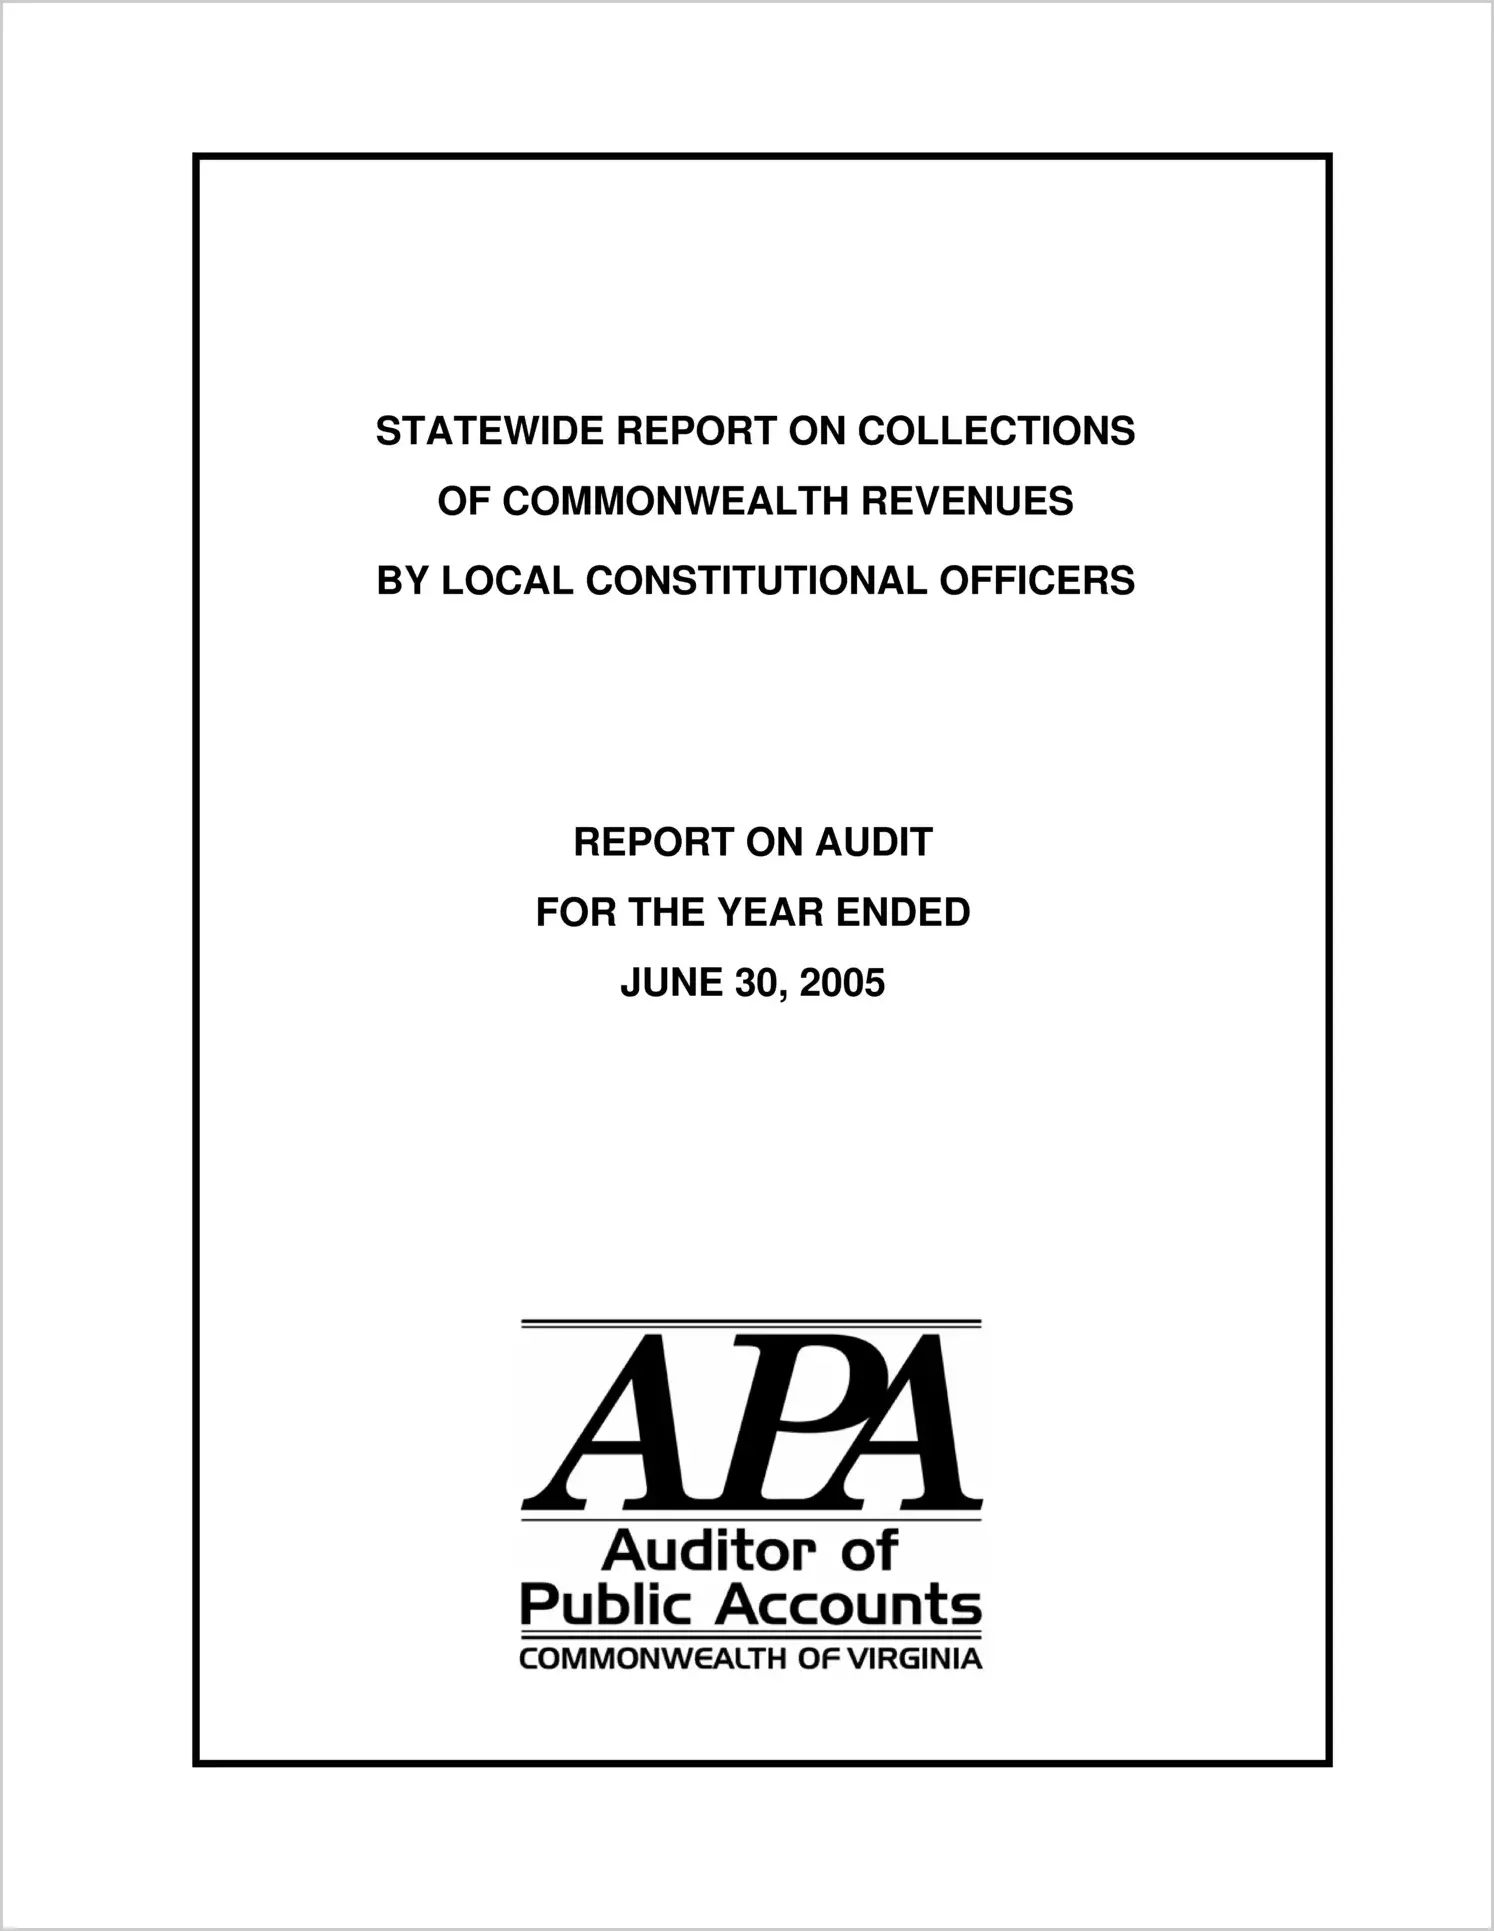 Statewide Report on Collection of Commonwealth Revenues by Local Constitutional Officers for the year ended June 30, 2005